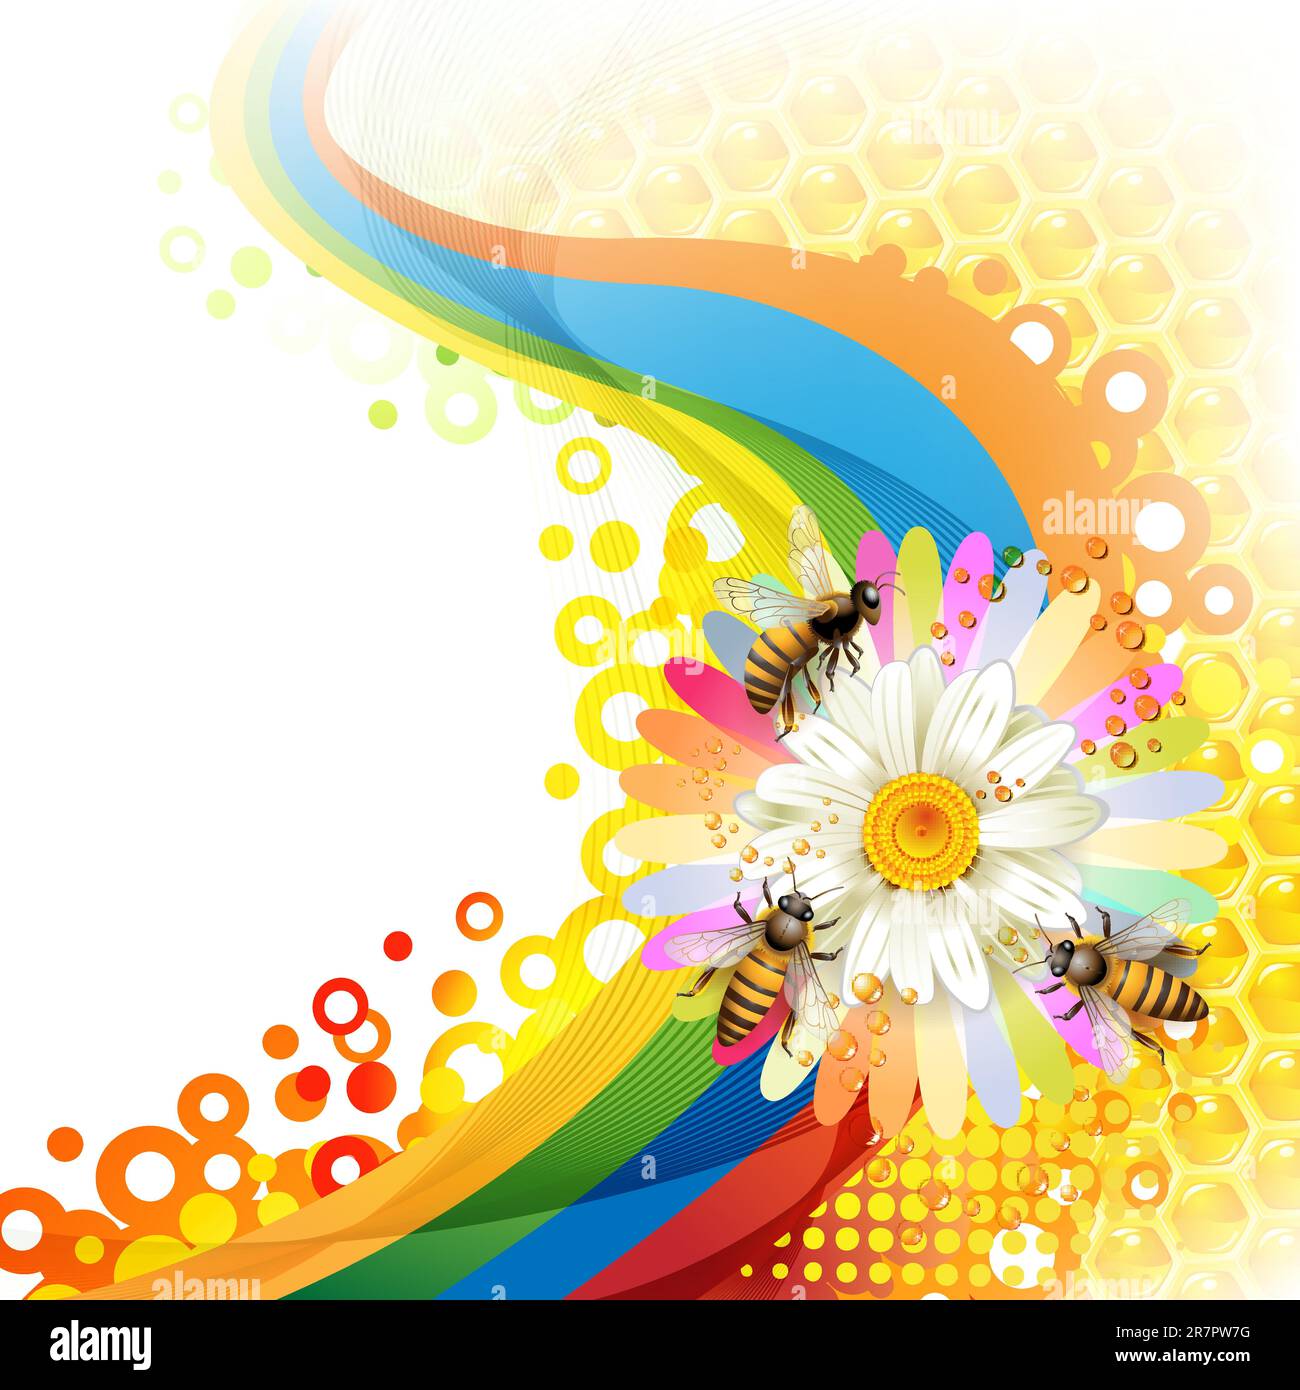 Bees and honeycombs over floral background Stock Vector